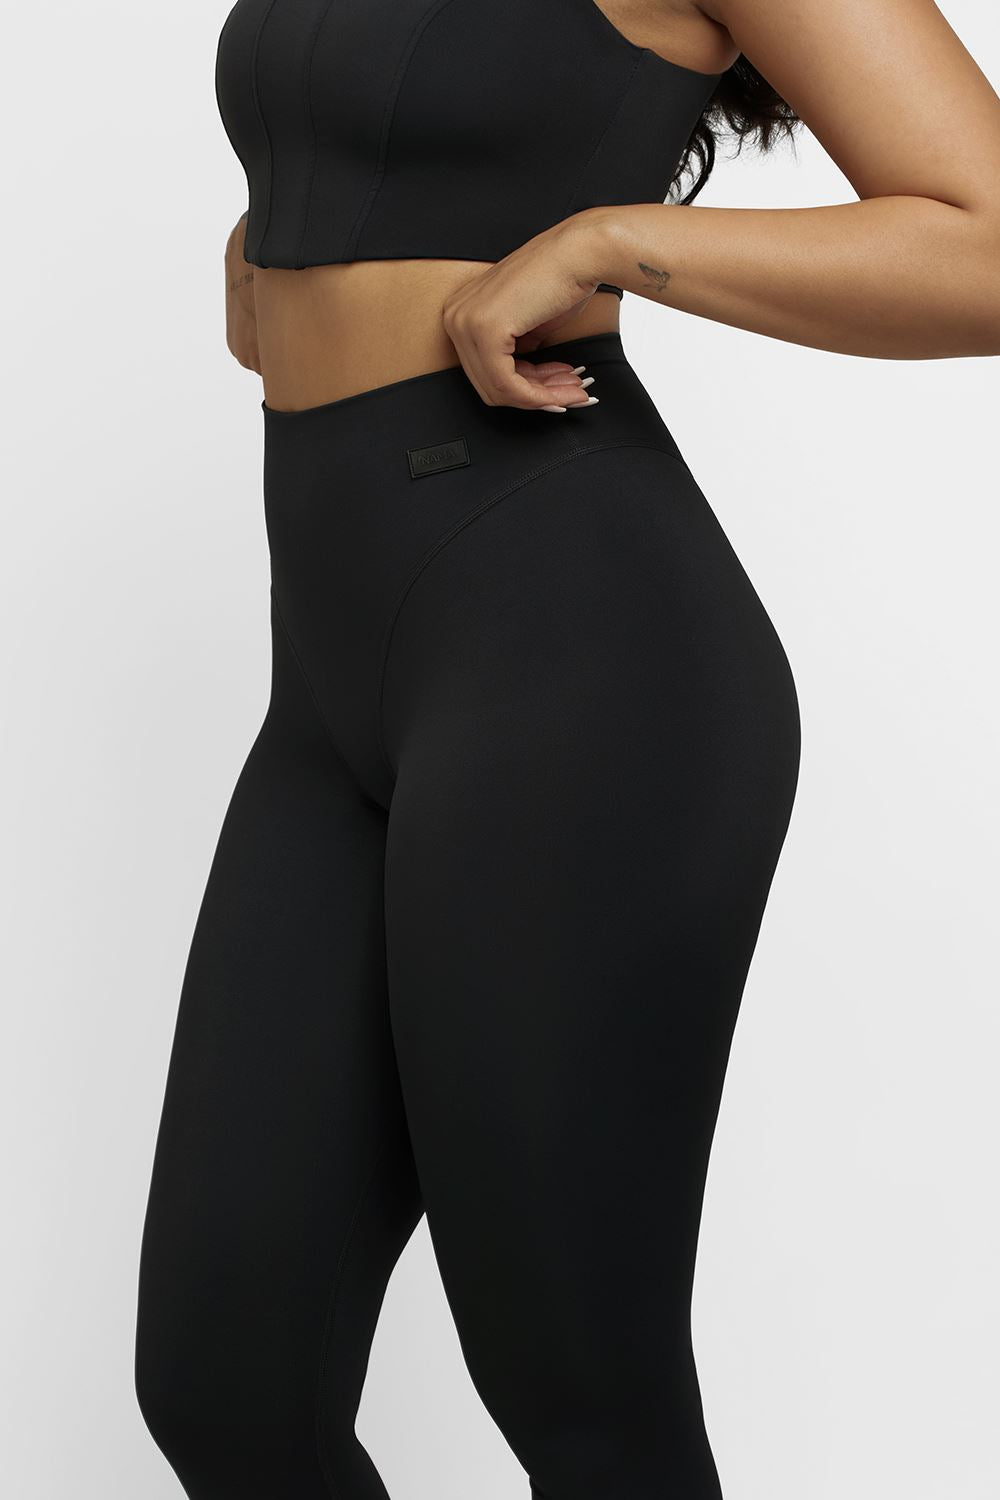 best undie for legging with padding｜TikTok Search